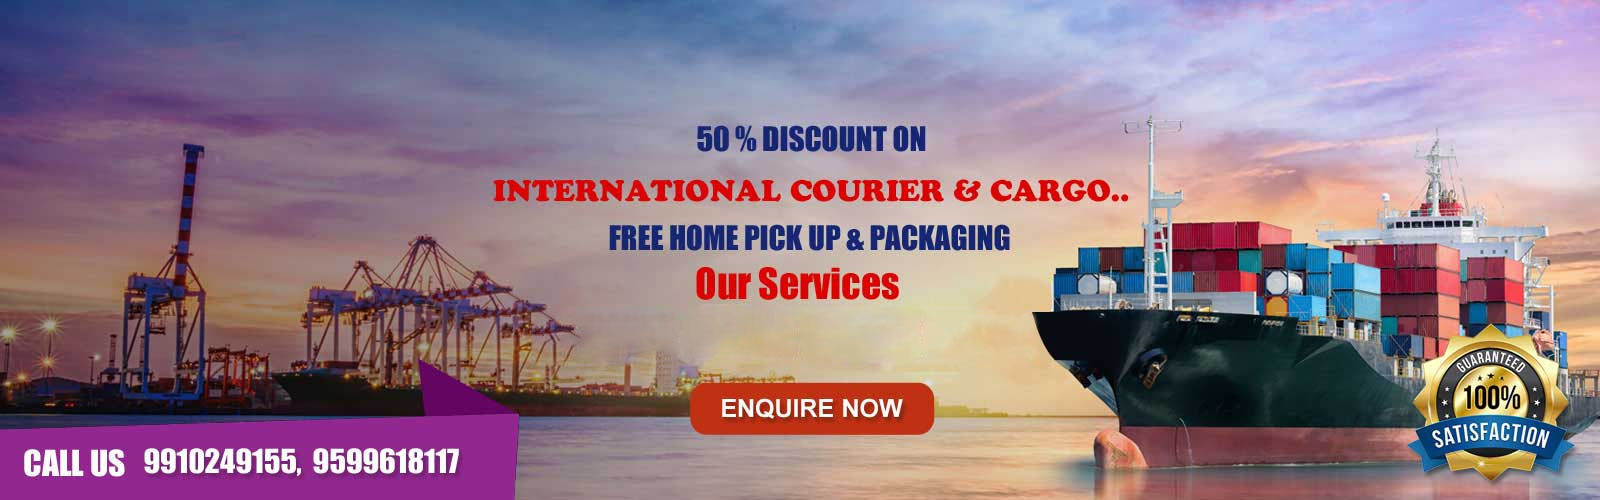 International Courier and Cargo in Dlf Gurgaon